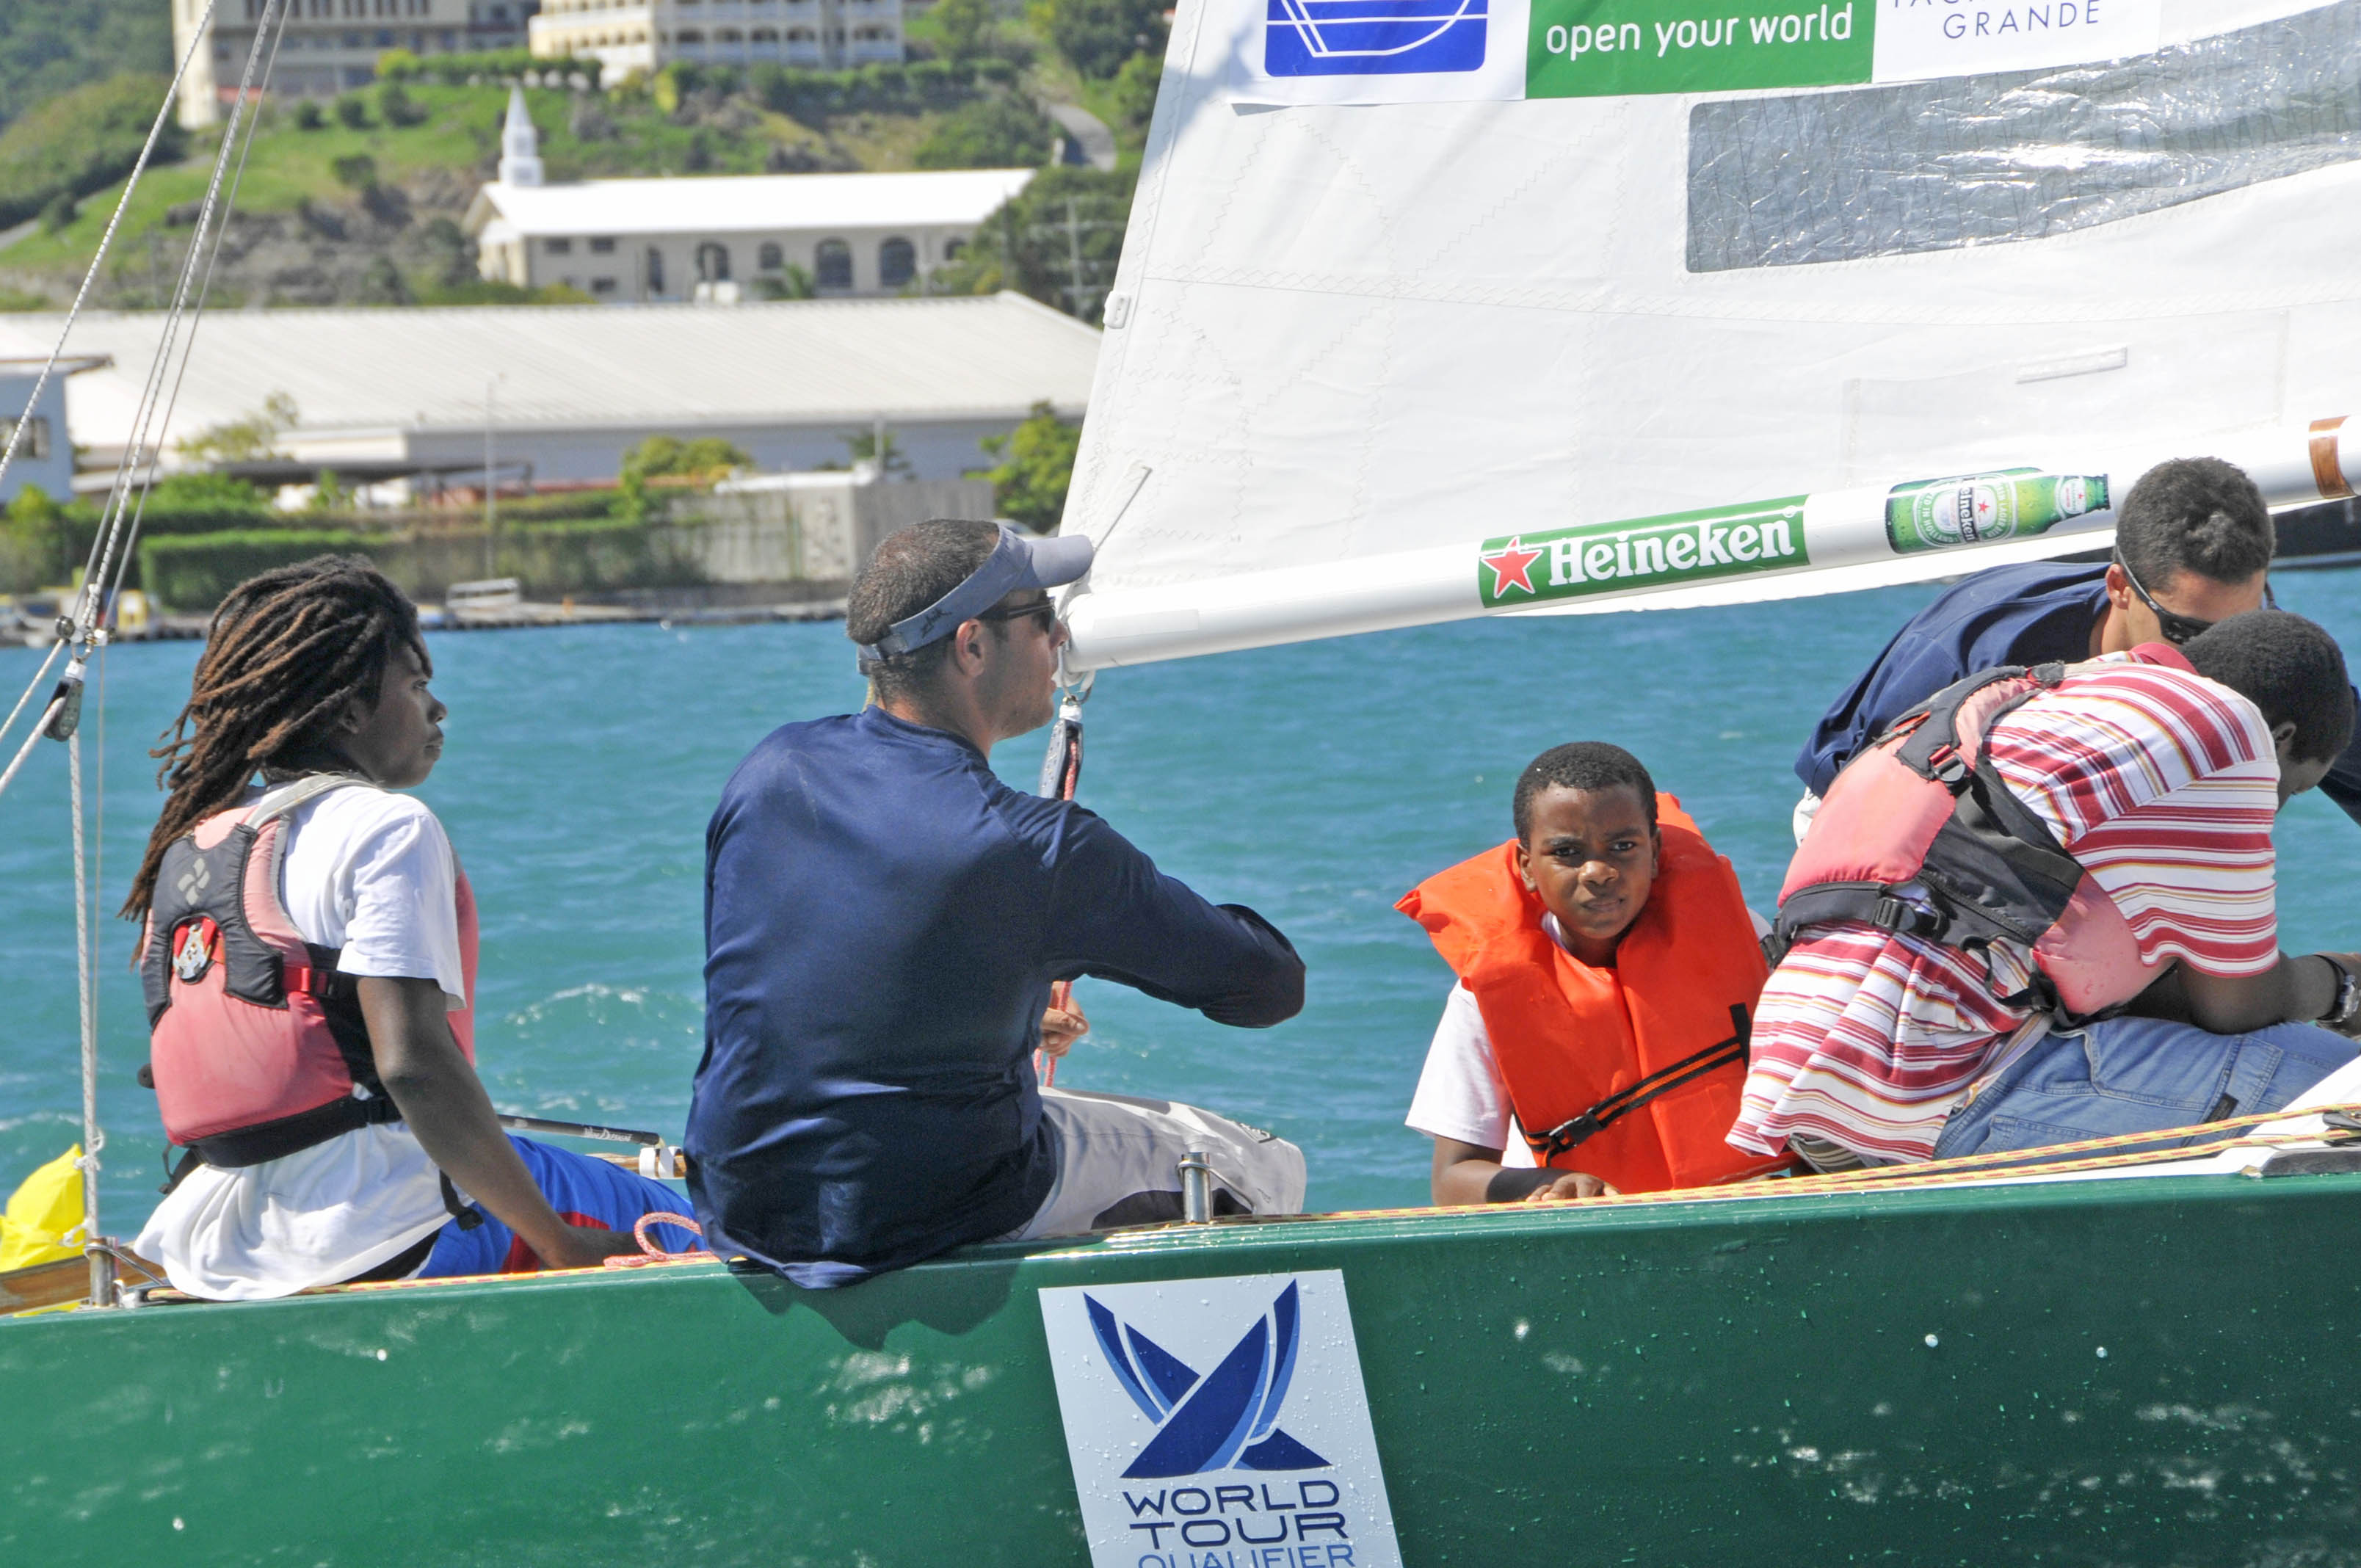 Lukata Samuel (left) tests the helm while Greece’s Stratis Andreadis (right of Samuel) calls tactics in the Carlos Aguilar Match Race Youth Regatta, sponsored by Budget Marine. (Credit: Dean Barnes)